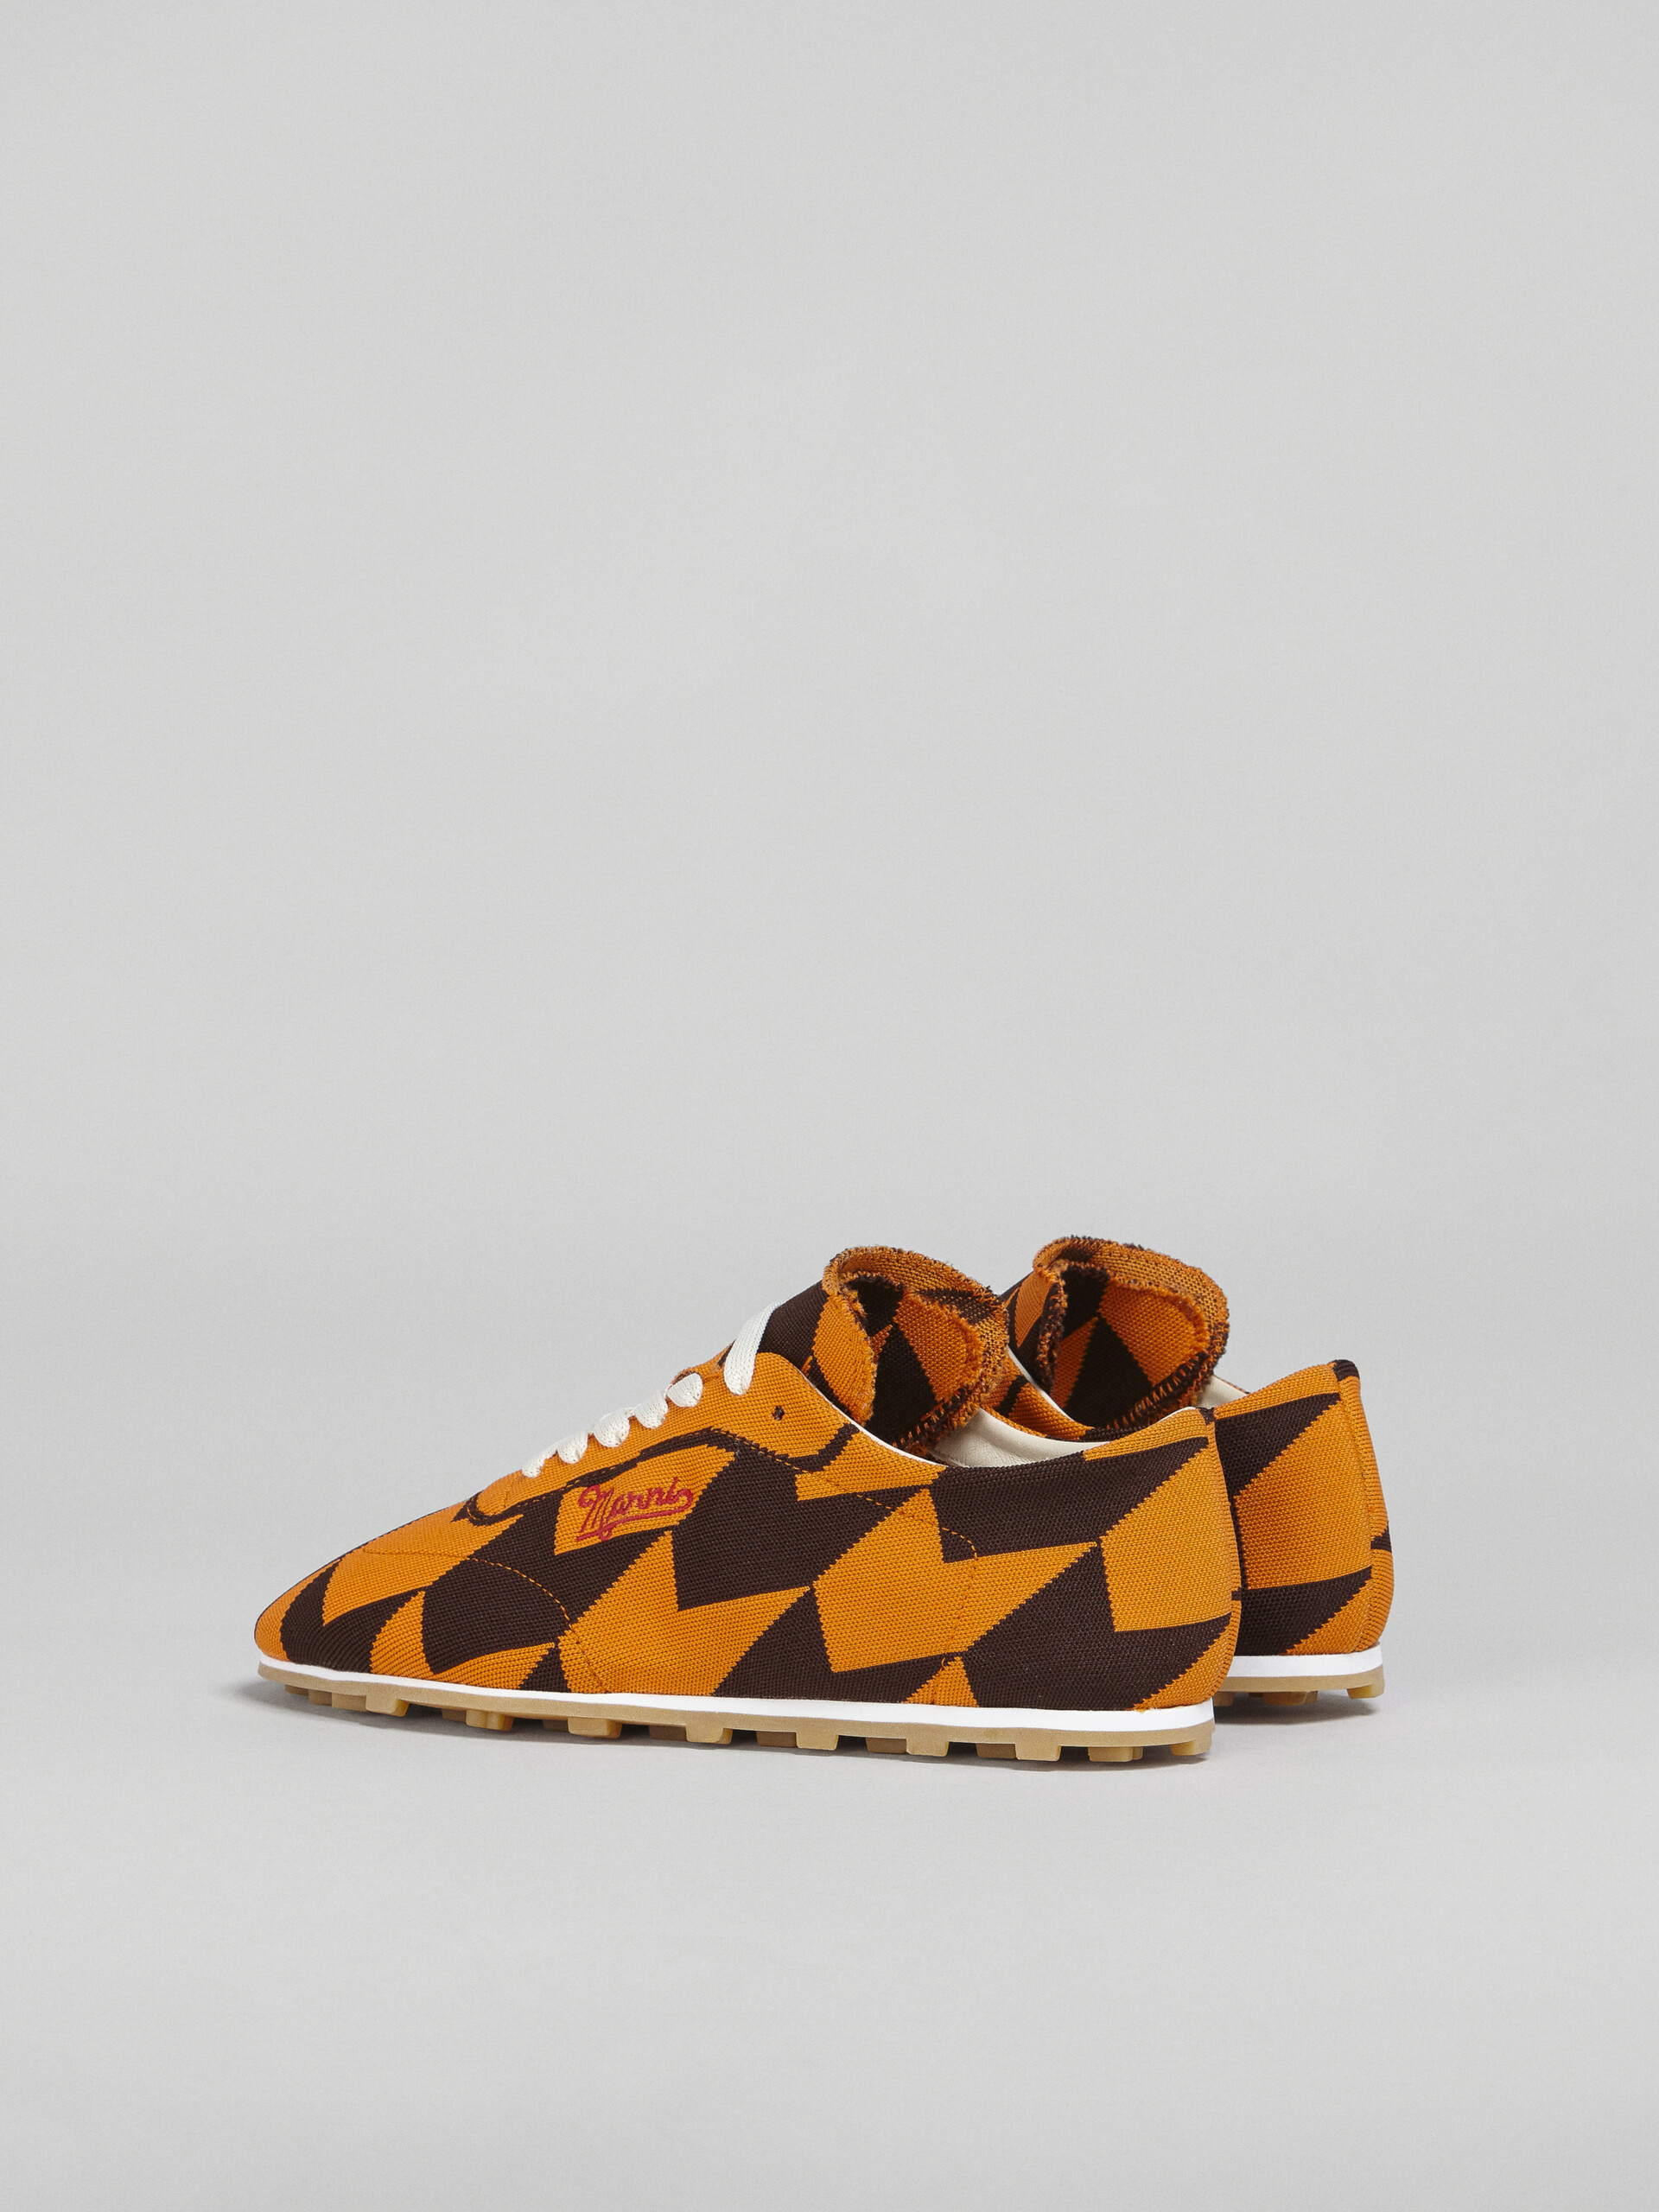 Houndstooth stretch jacquard PEBBLE sneaker - Sneakers - Image 3